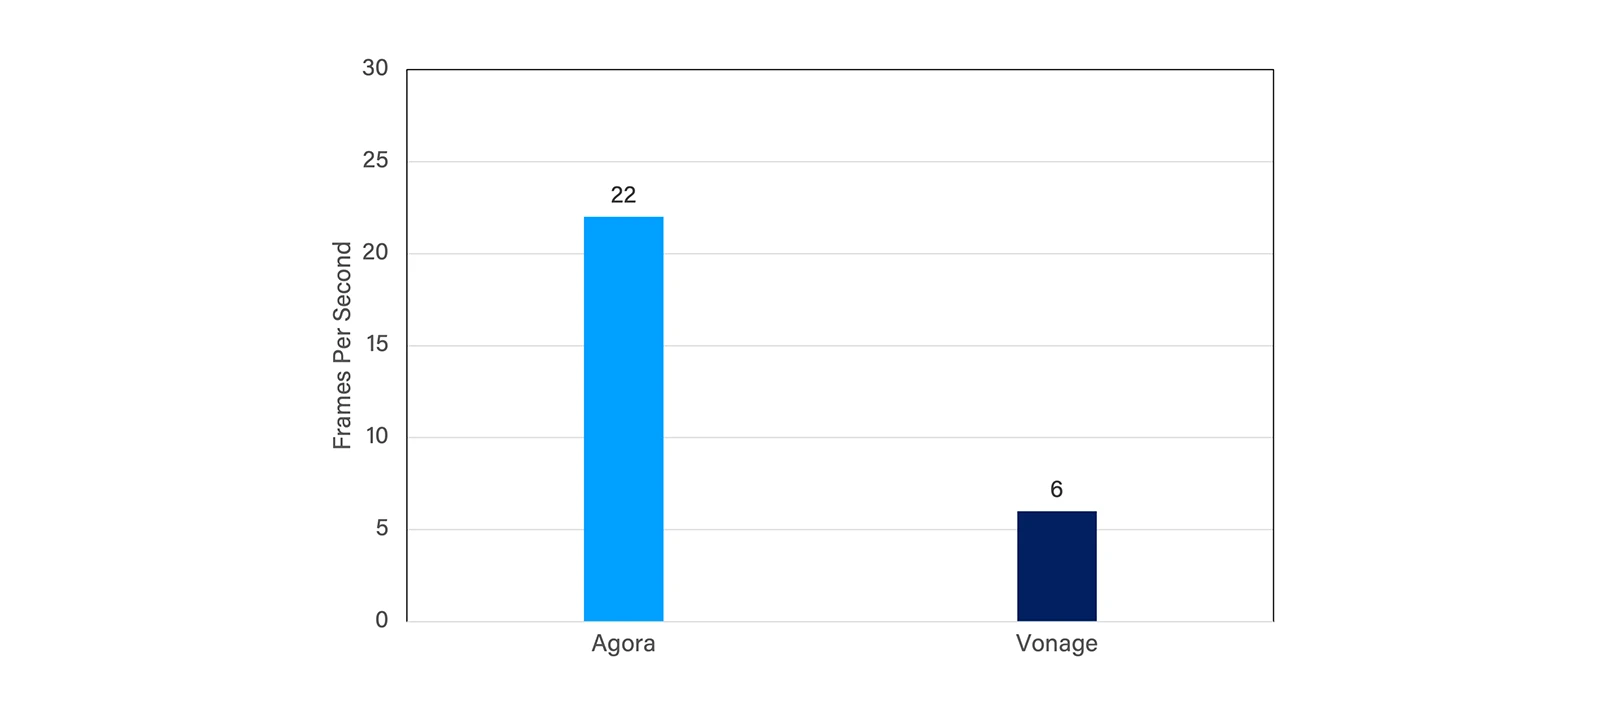 Figure 4: FPS comparison for Agora and Vonage with network having uplink 600ms jitter.